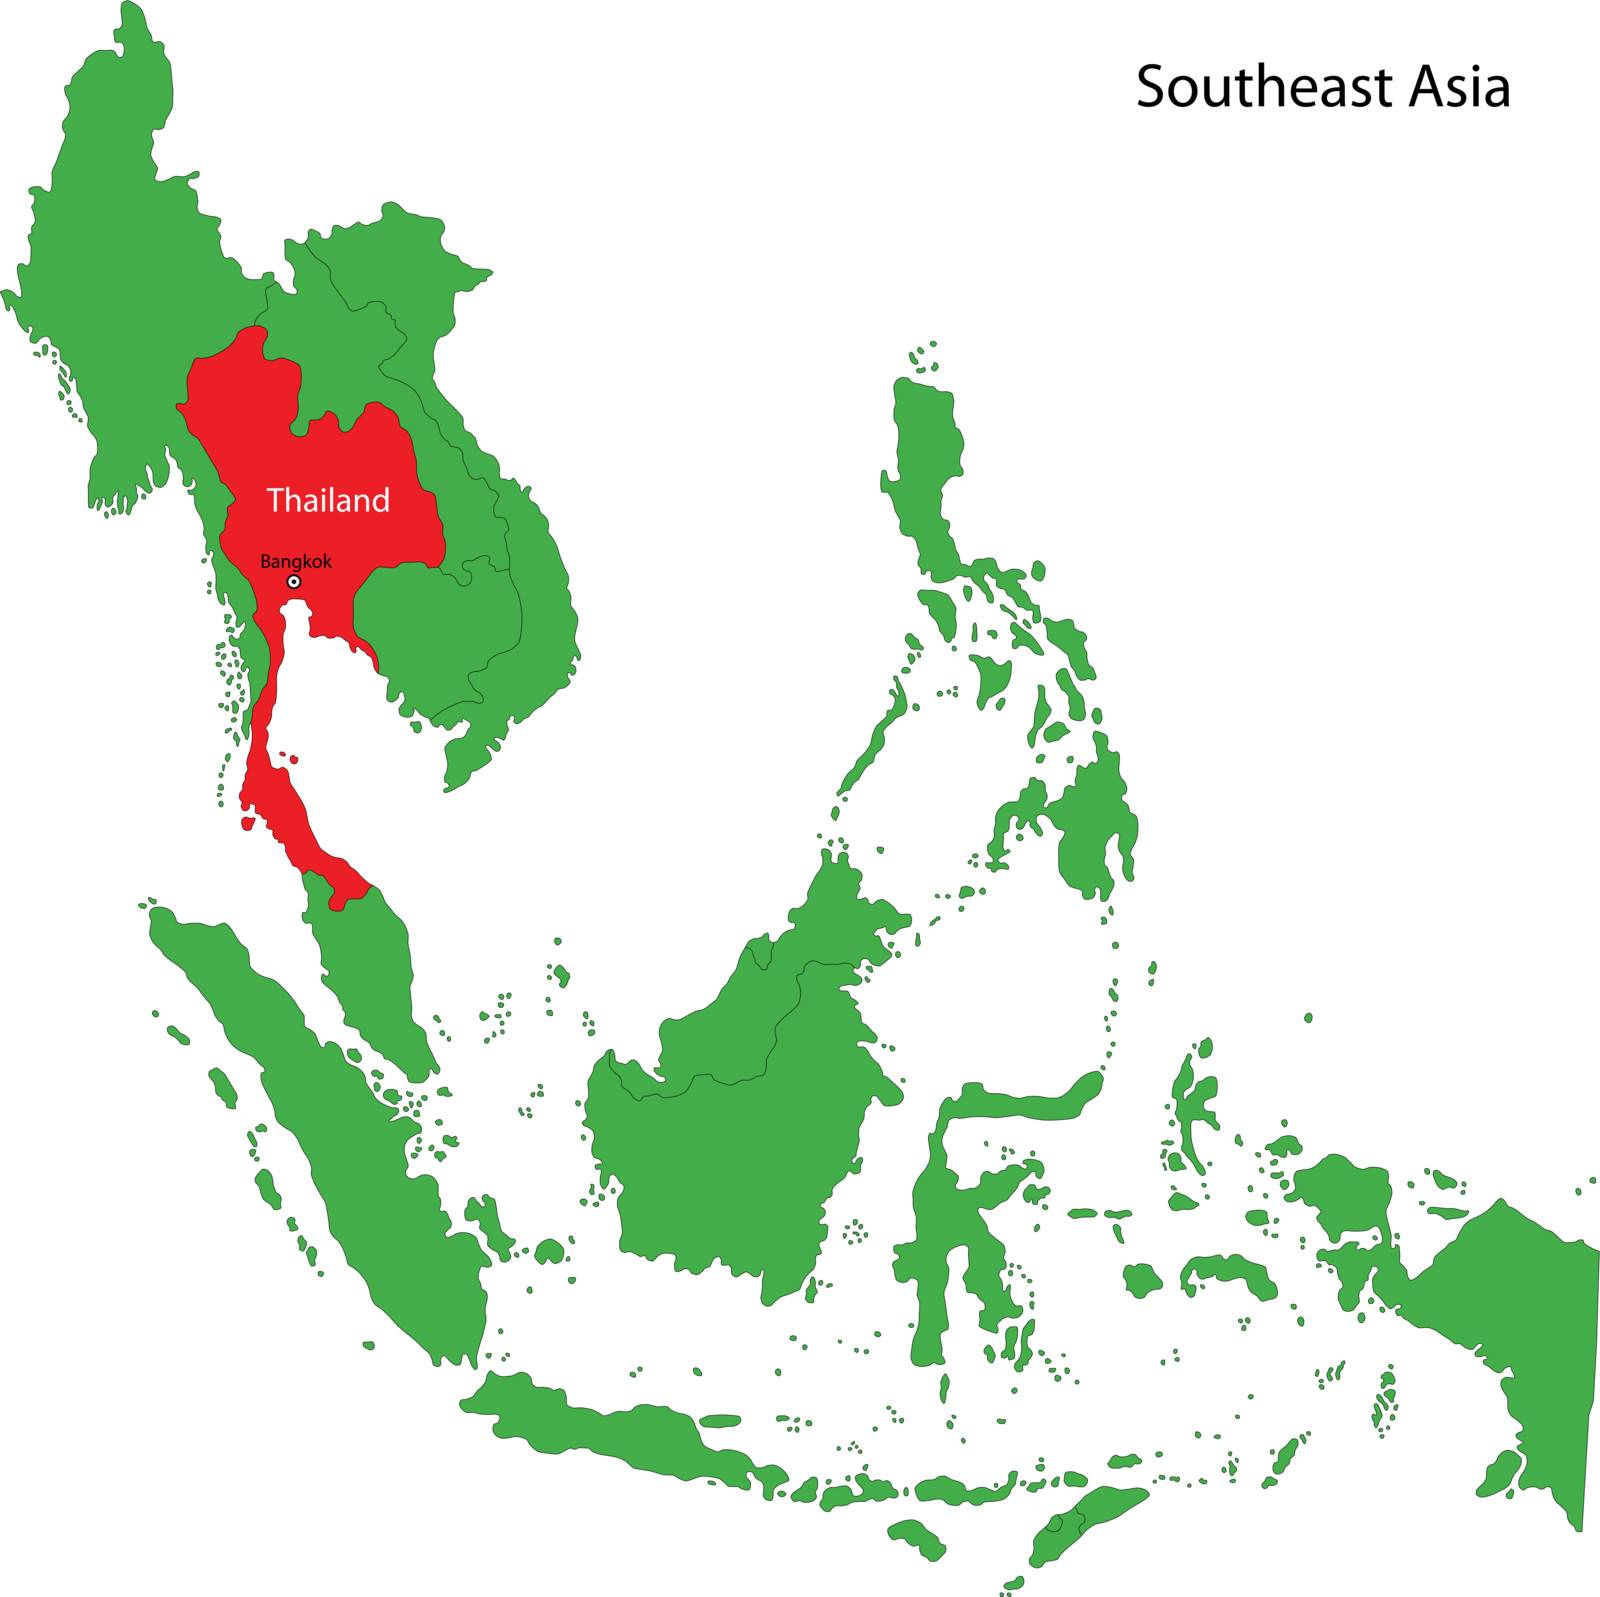 Location of Thailand on the Southeast Asia